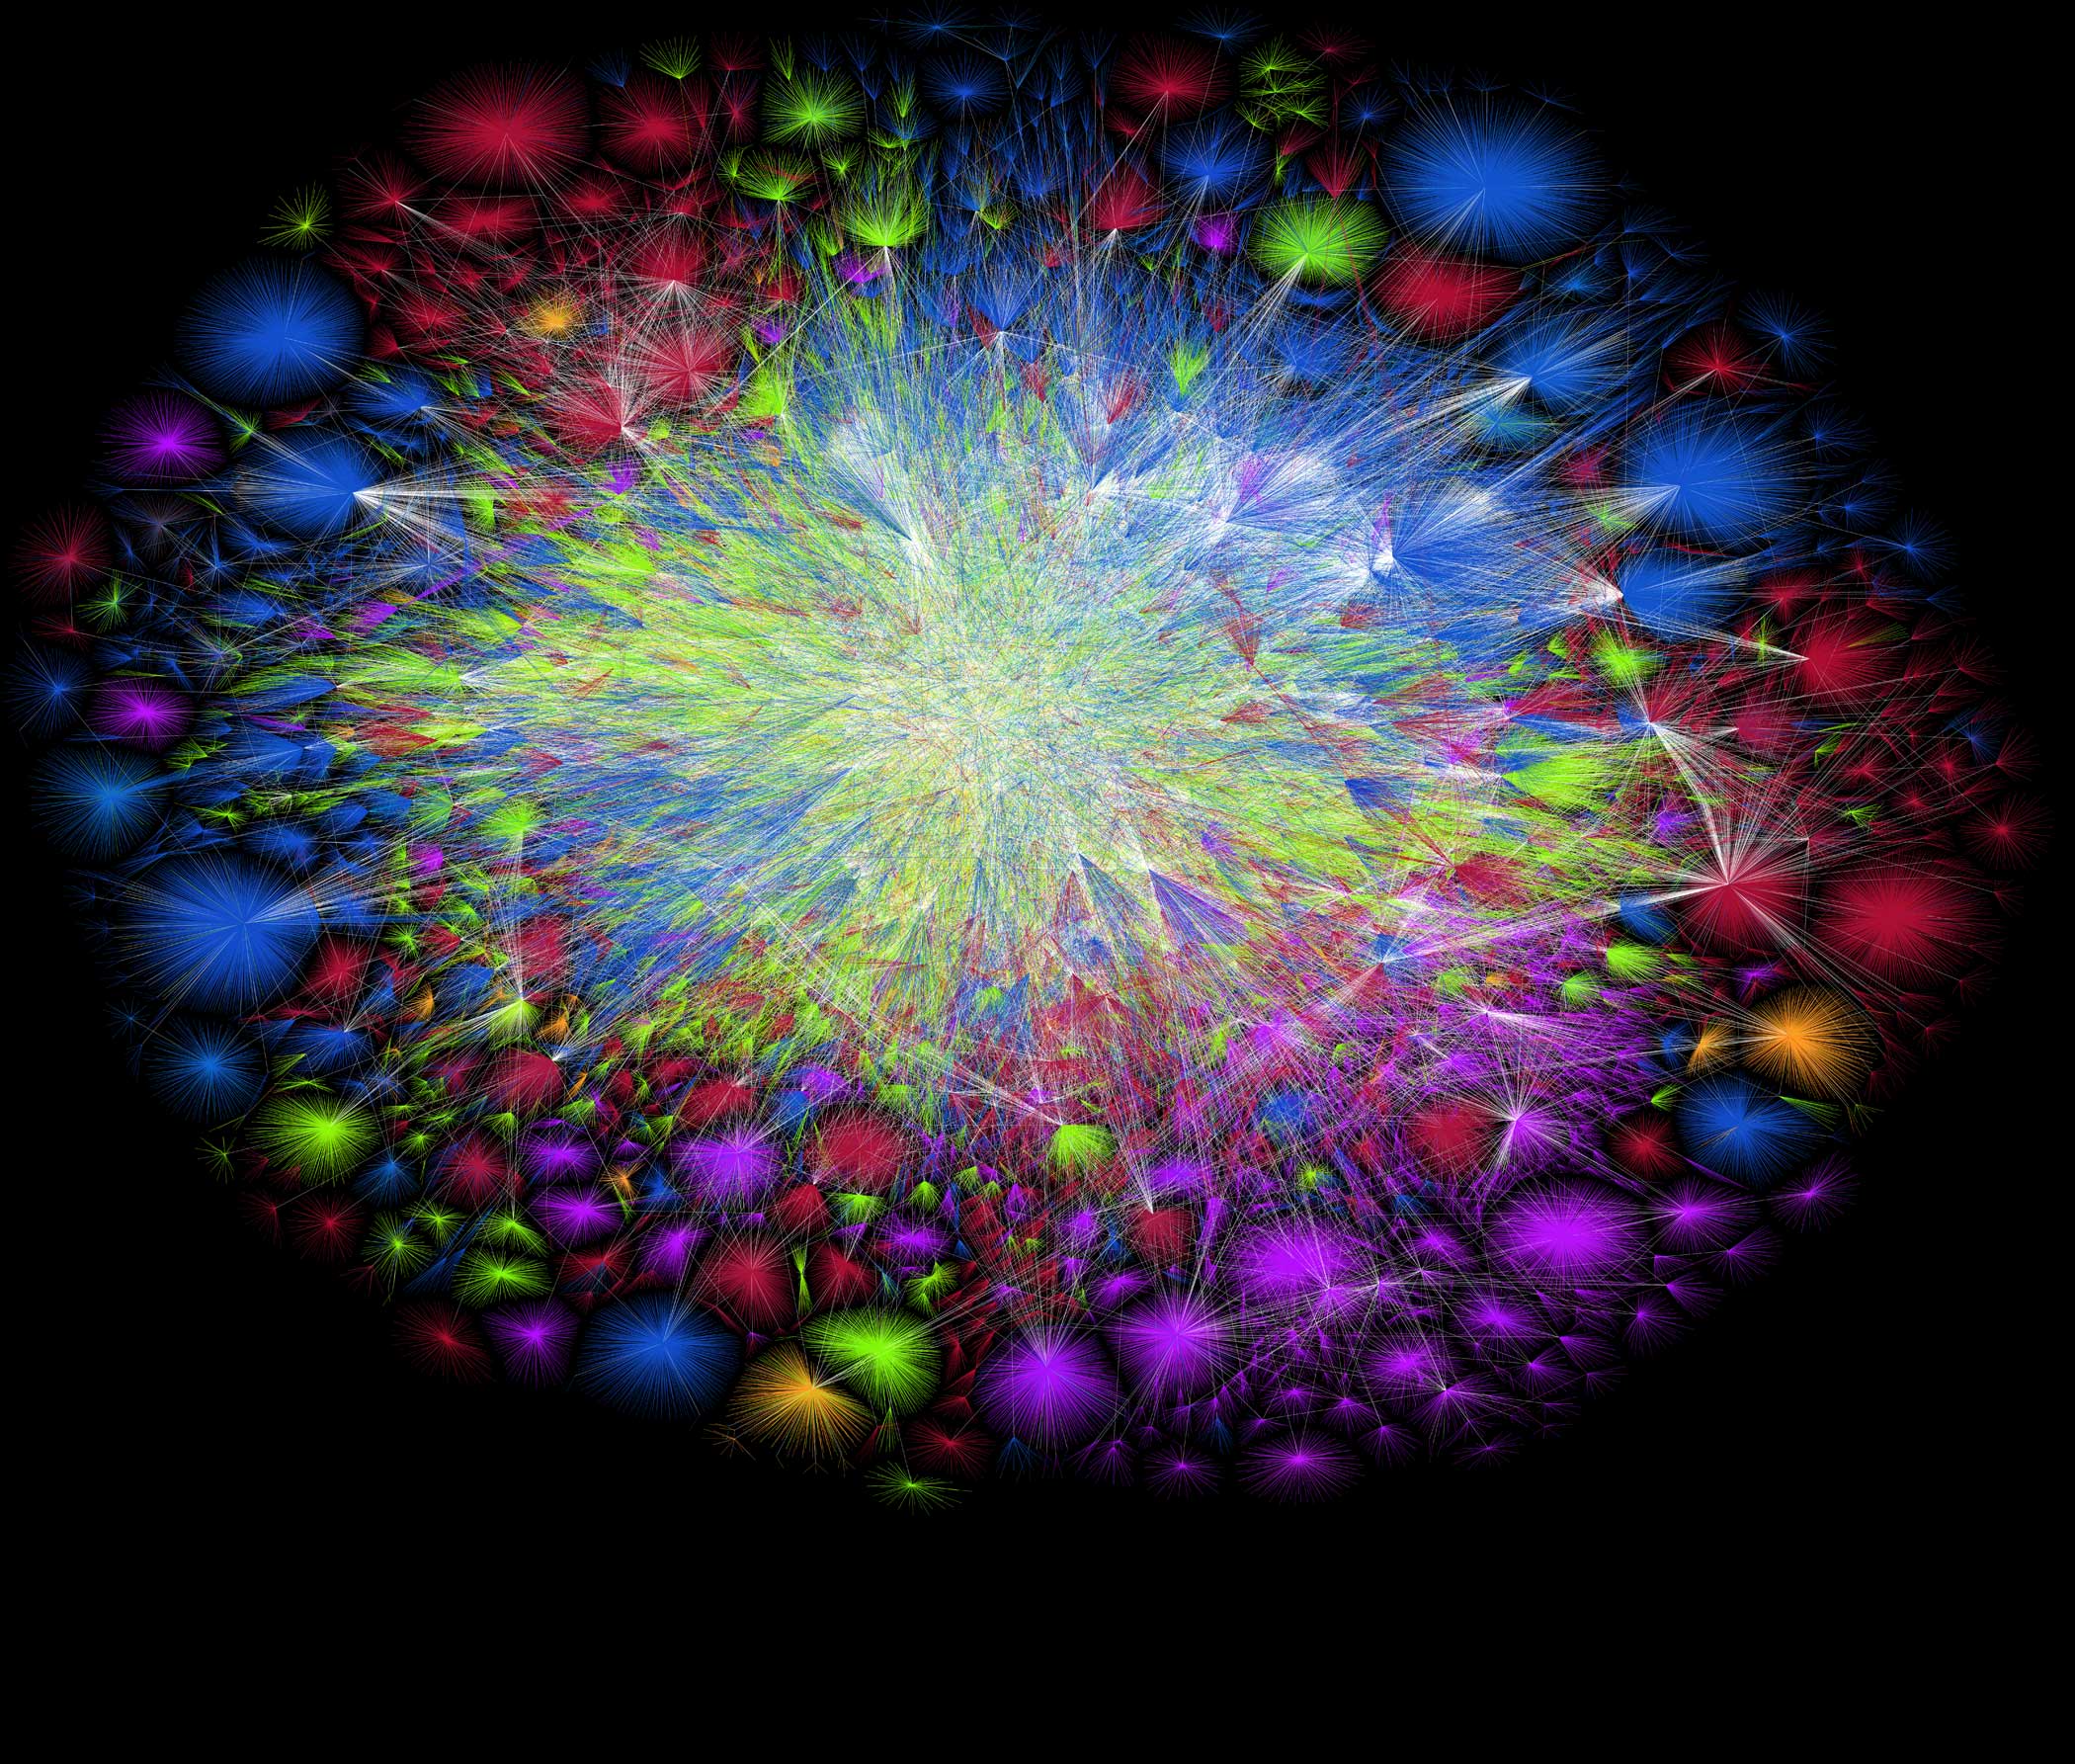 2012 As the Internet grows, the center of the map becomes more dense with connections. That's because more users are connecting to more ISPs, which, when mapped, results in more lines.
                              
                              Here's an example: the center of the Africa starburst at 4 o'clock represents Telecom Egypt (TE Data), an ISP in Egypt that had 1.2 million customers in 2012.